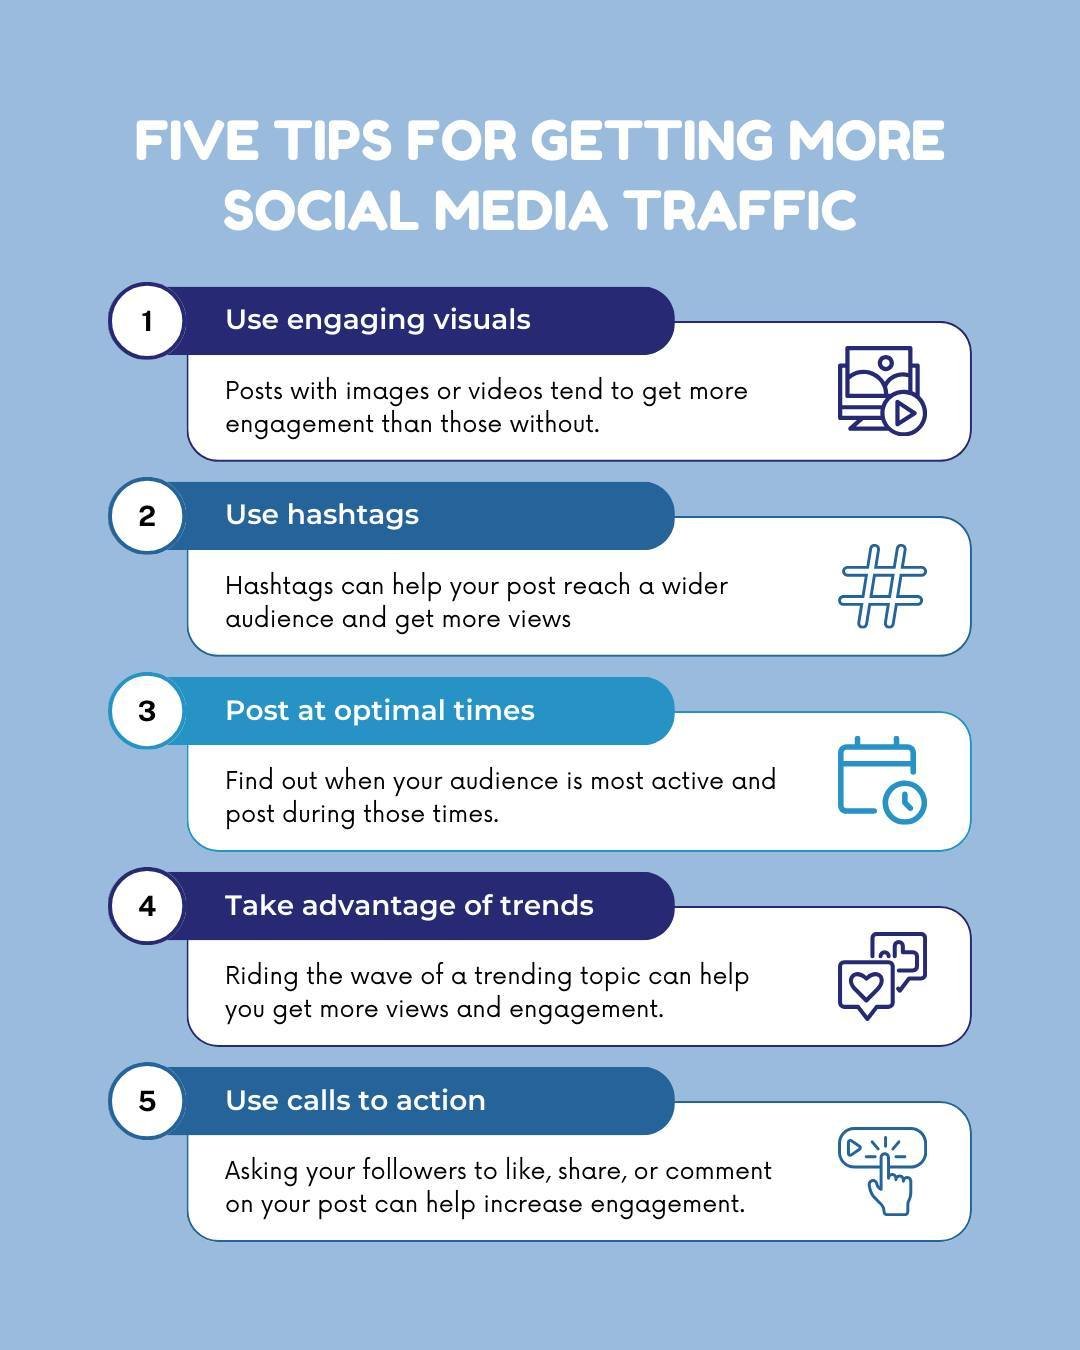 Unlock Your Social Media Potential 🗝: Five Tips to Boost Your Traffic and Engagement!